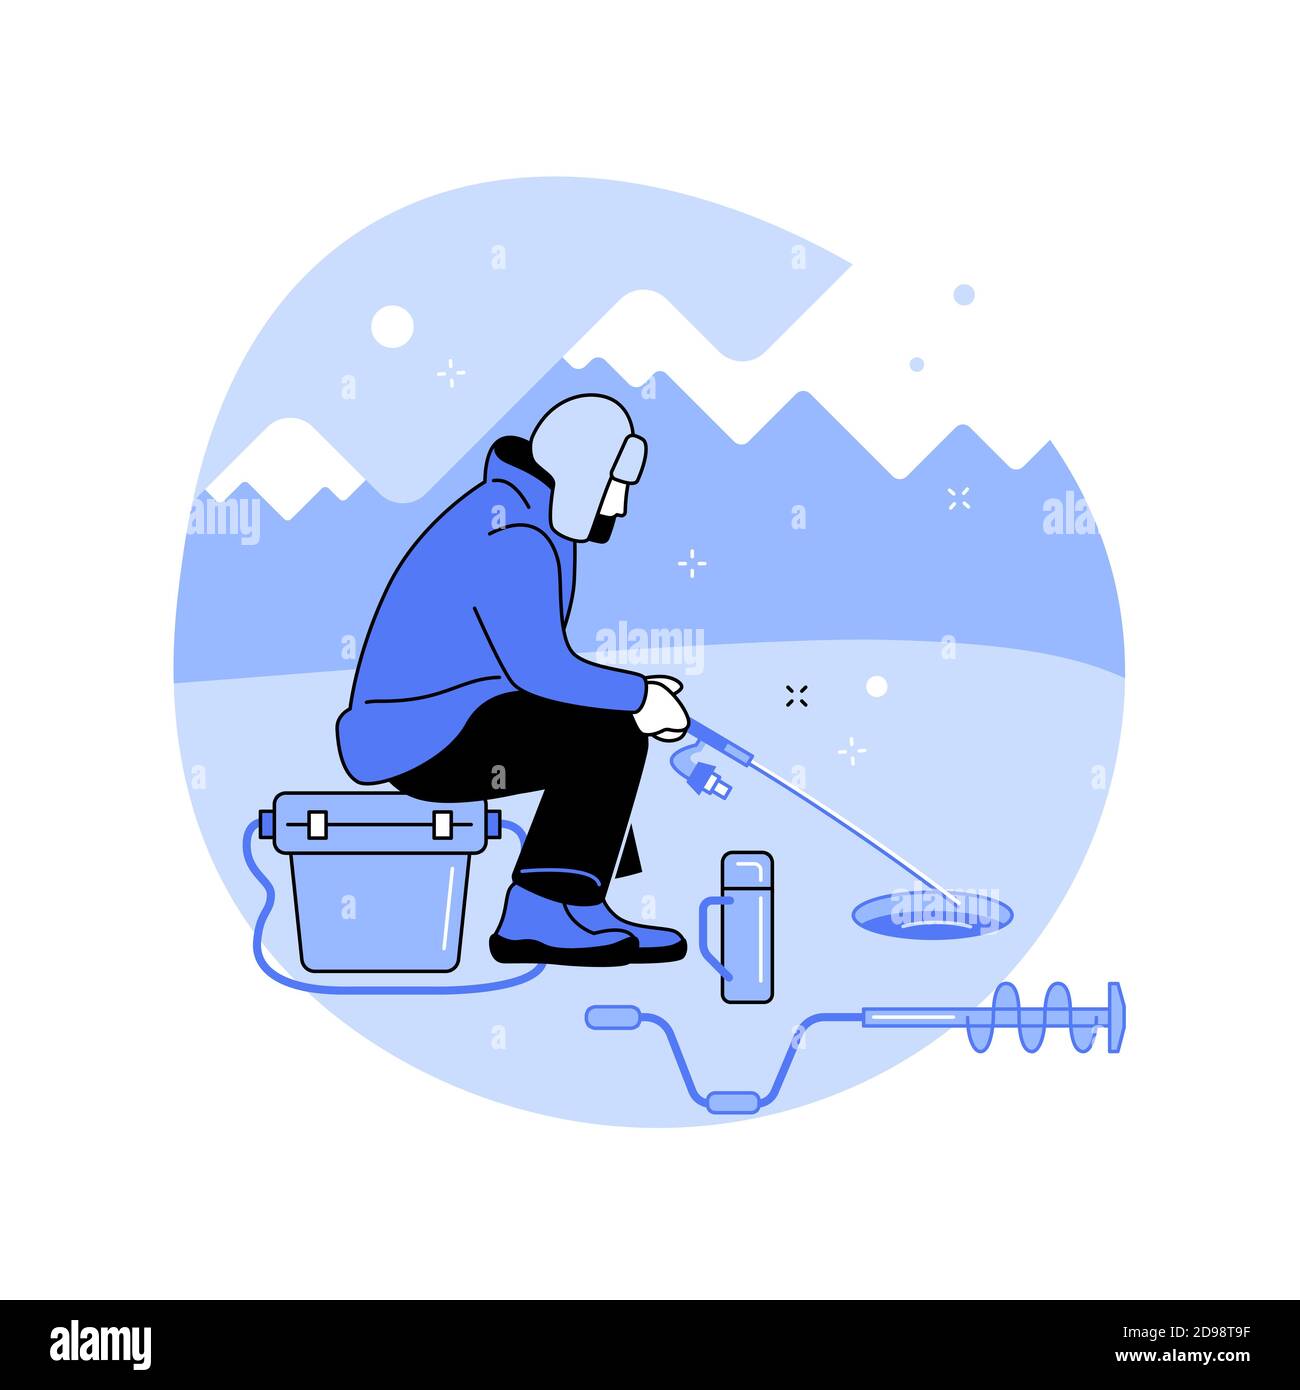 https://c8.alamy.com/comp/2D98T9F/ice-fishing-abstract-concept-vector-illustration-2D98T9F.jpg